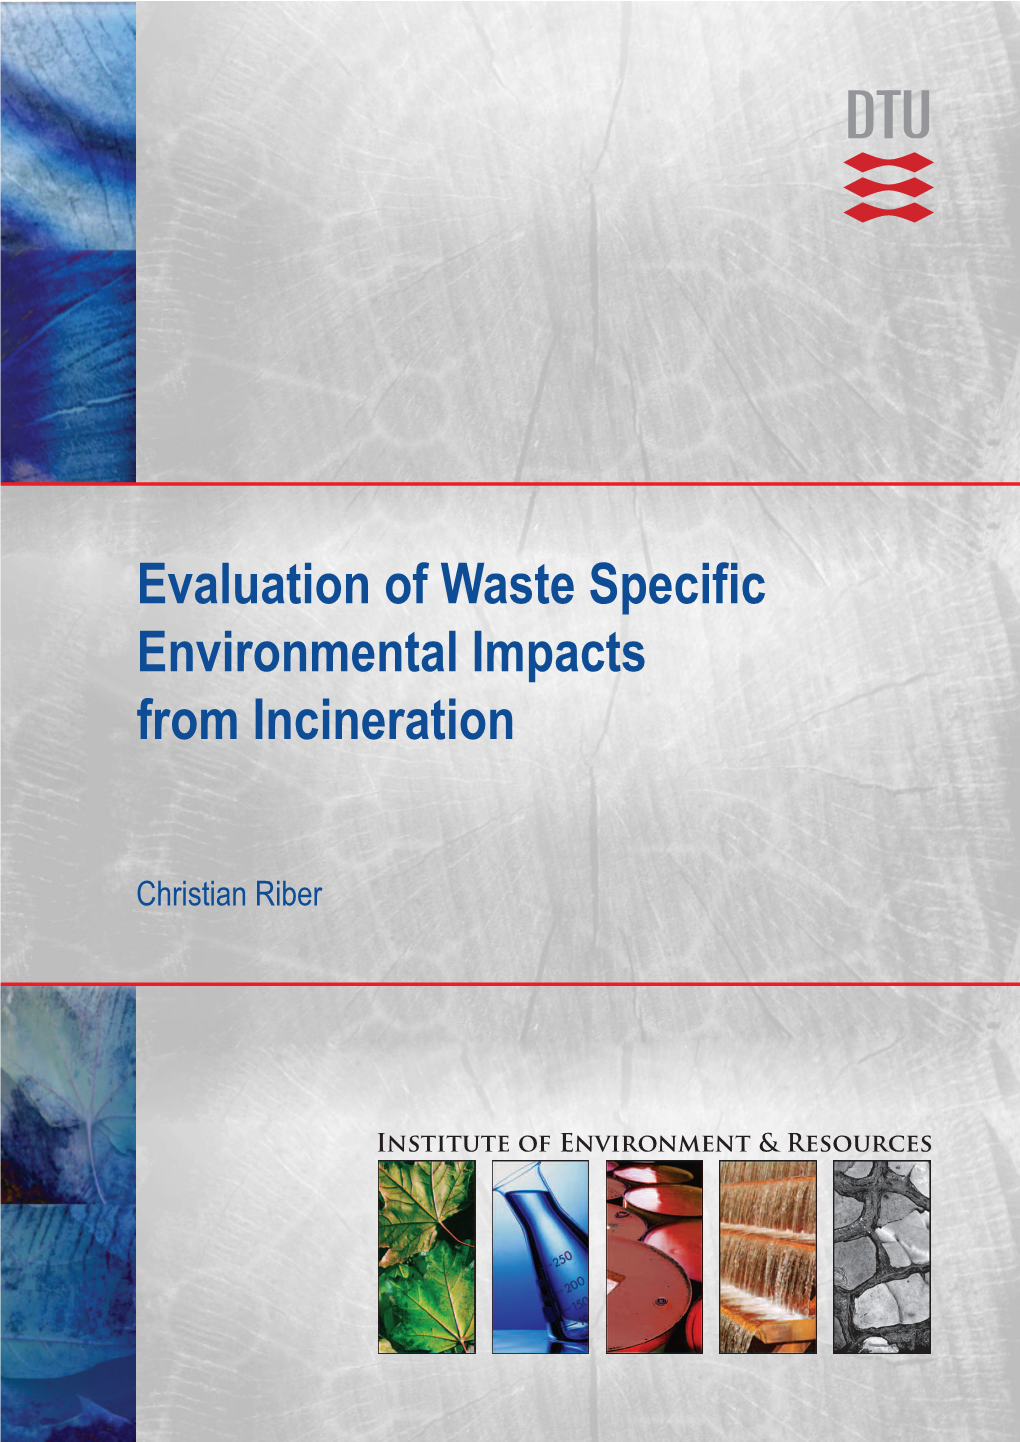 Evaluation of Waste Specific Environmental Impacts from Incineration